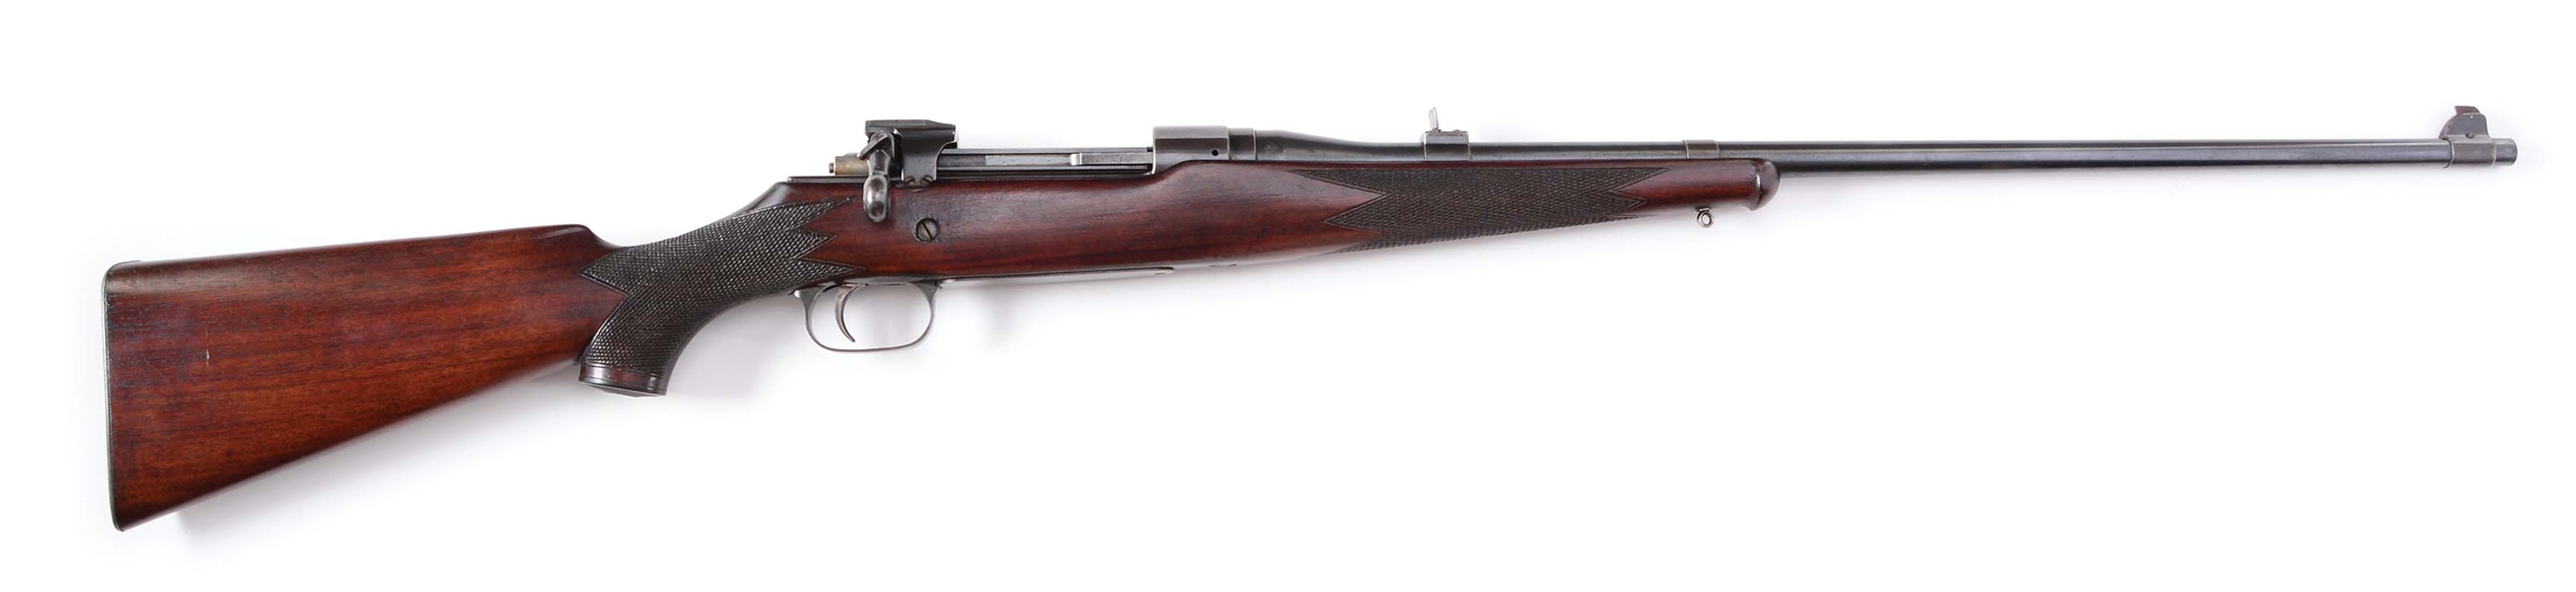 (C) ROSS MDEL 1910 STRAIGHT PULL BOLT ACTION SPORTING RIFLE.